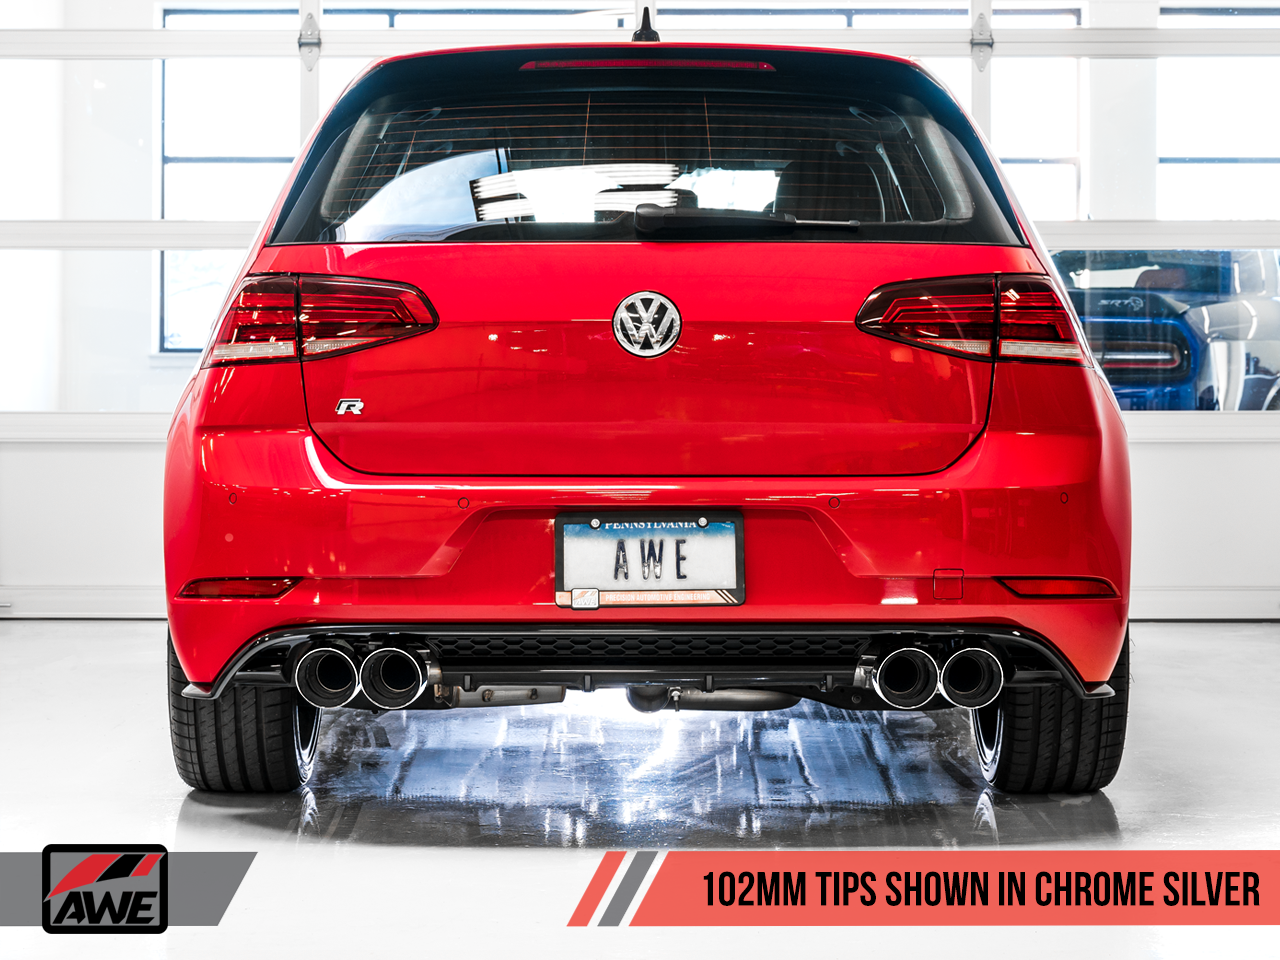 AWE Track Edition Exhaust for MK7.5 Golf R - Motorsports LA